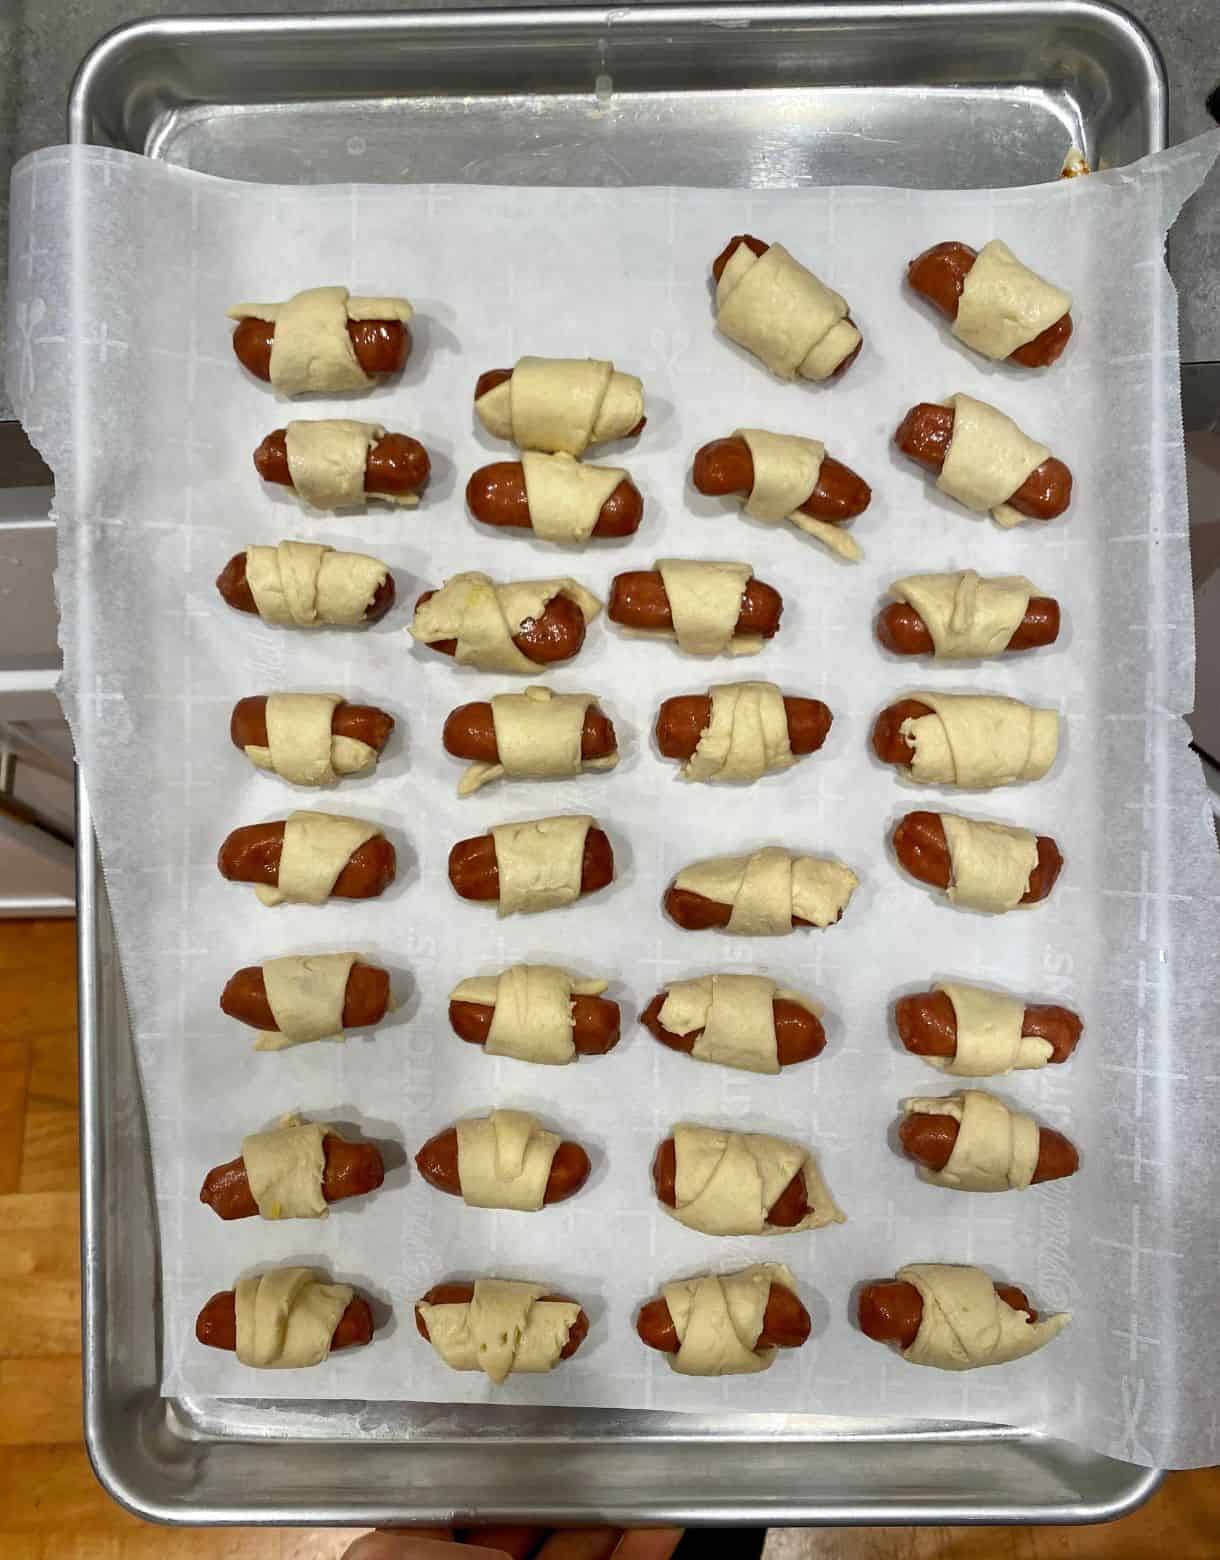 Sheet pan of uncooked Pigs in a Blanket.